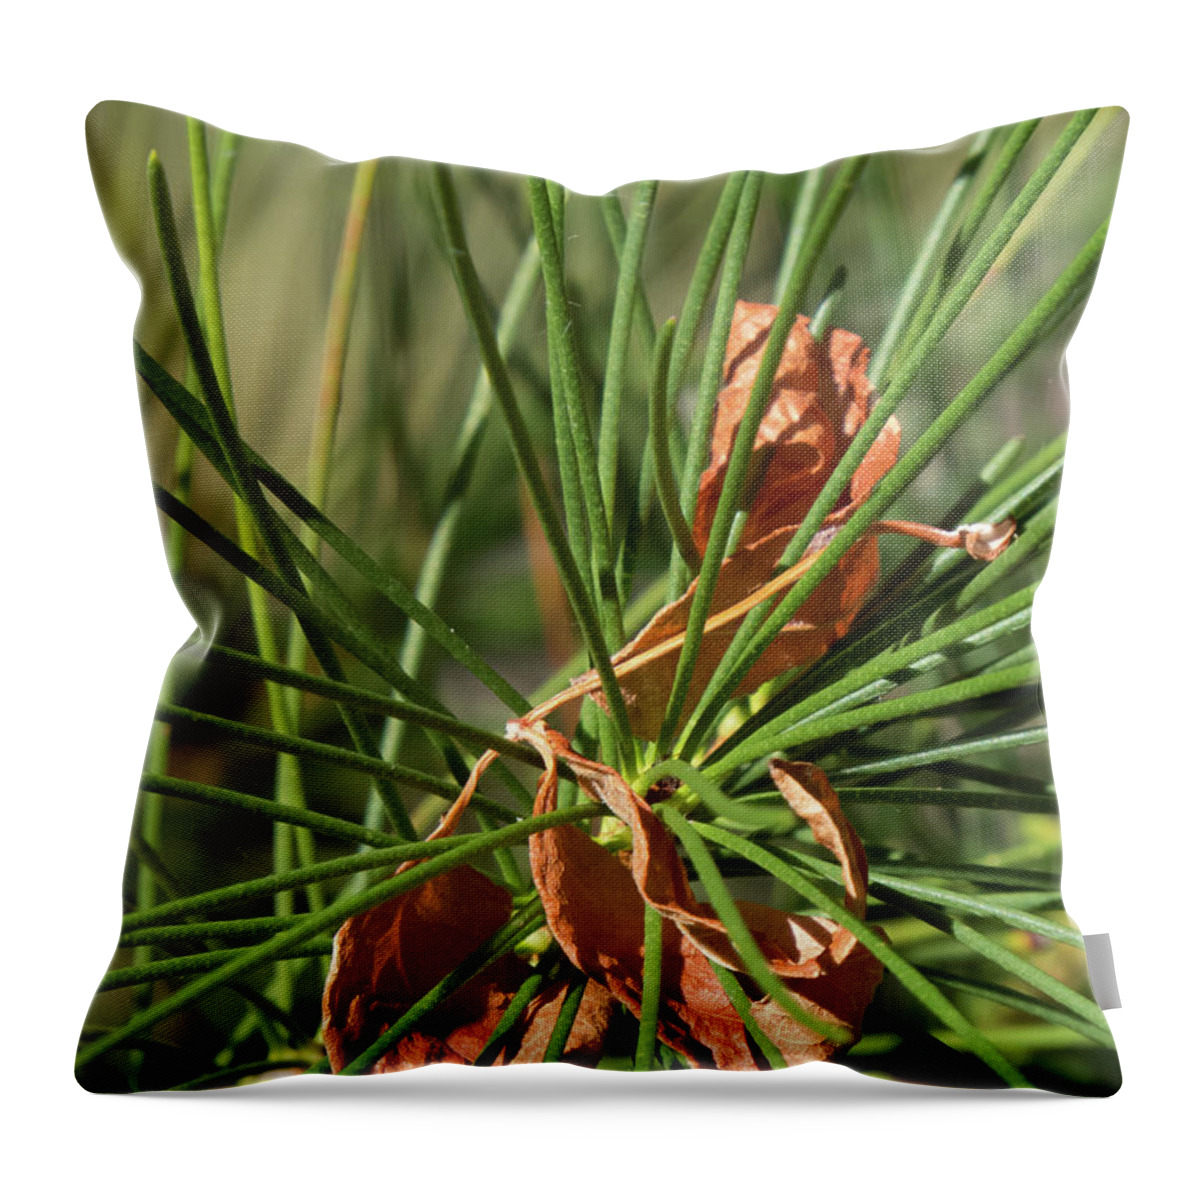 Green Throw Pillow featuring the photograph Pine Needles 1 by Christy Garavetto